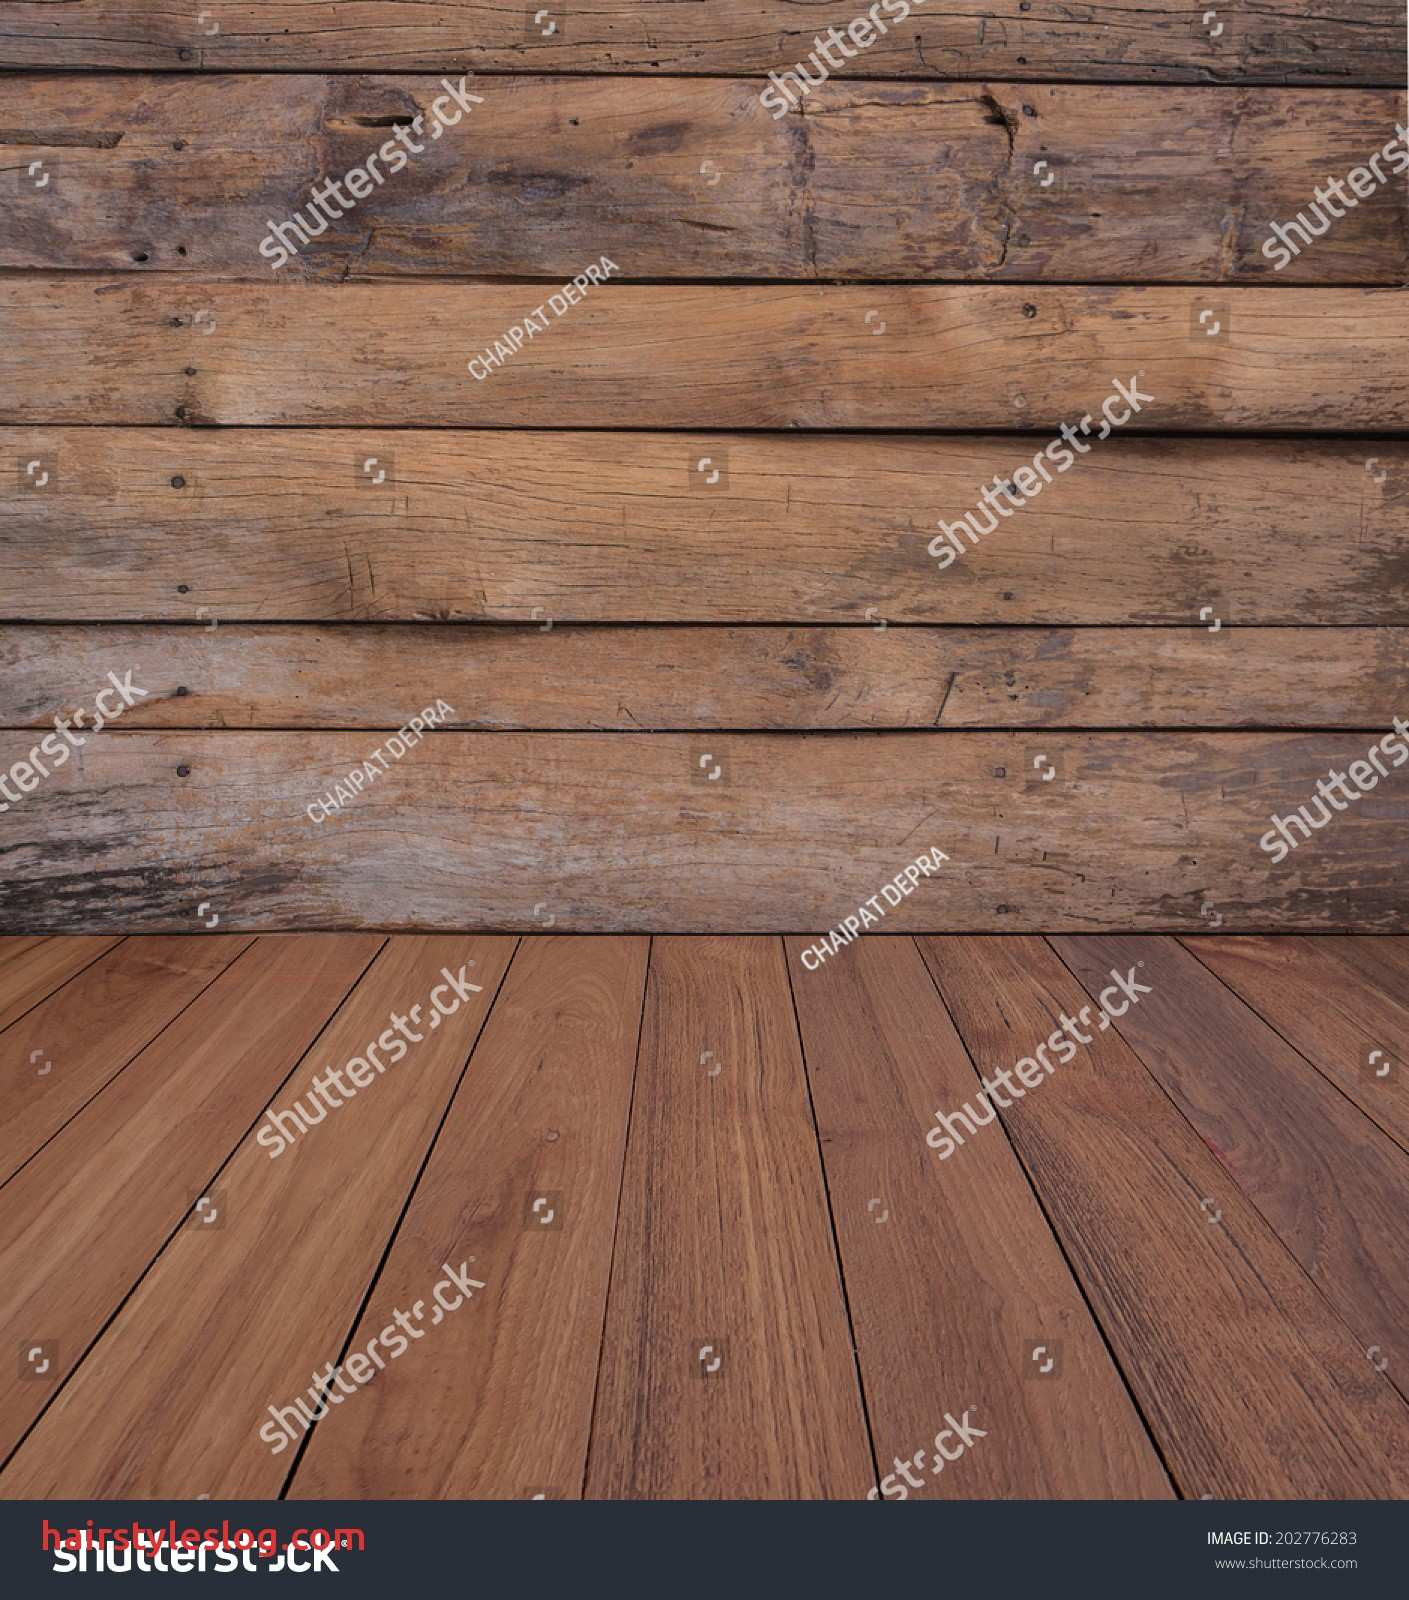 hardwood floors discount prices of modern contemporary hardwood floor 3d texture for home prepare od intended for modern contemporary hardwood floor 3d texture for home prepare od wood wall wood floor stock photo royalty free 202776283